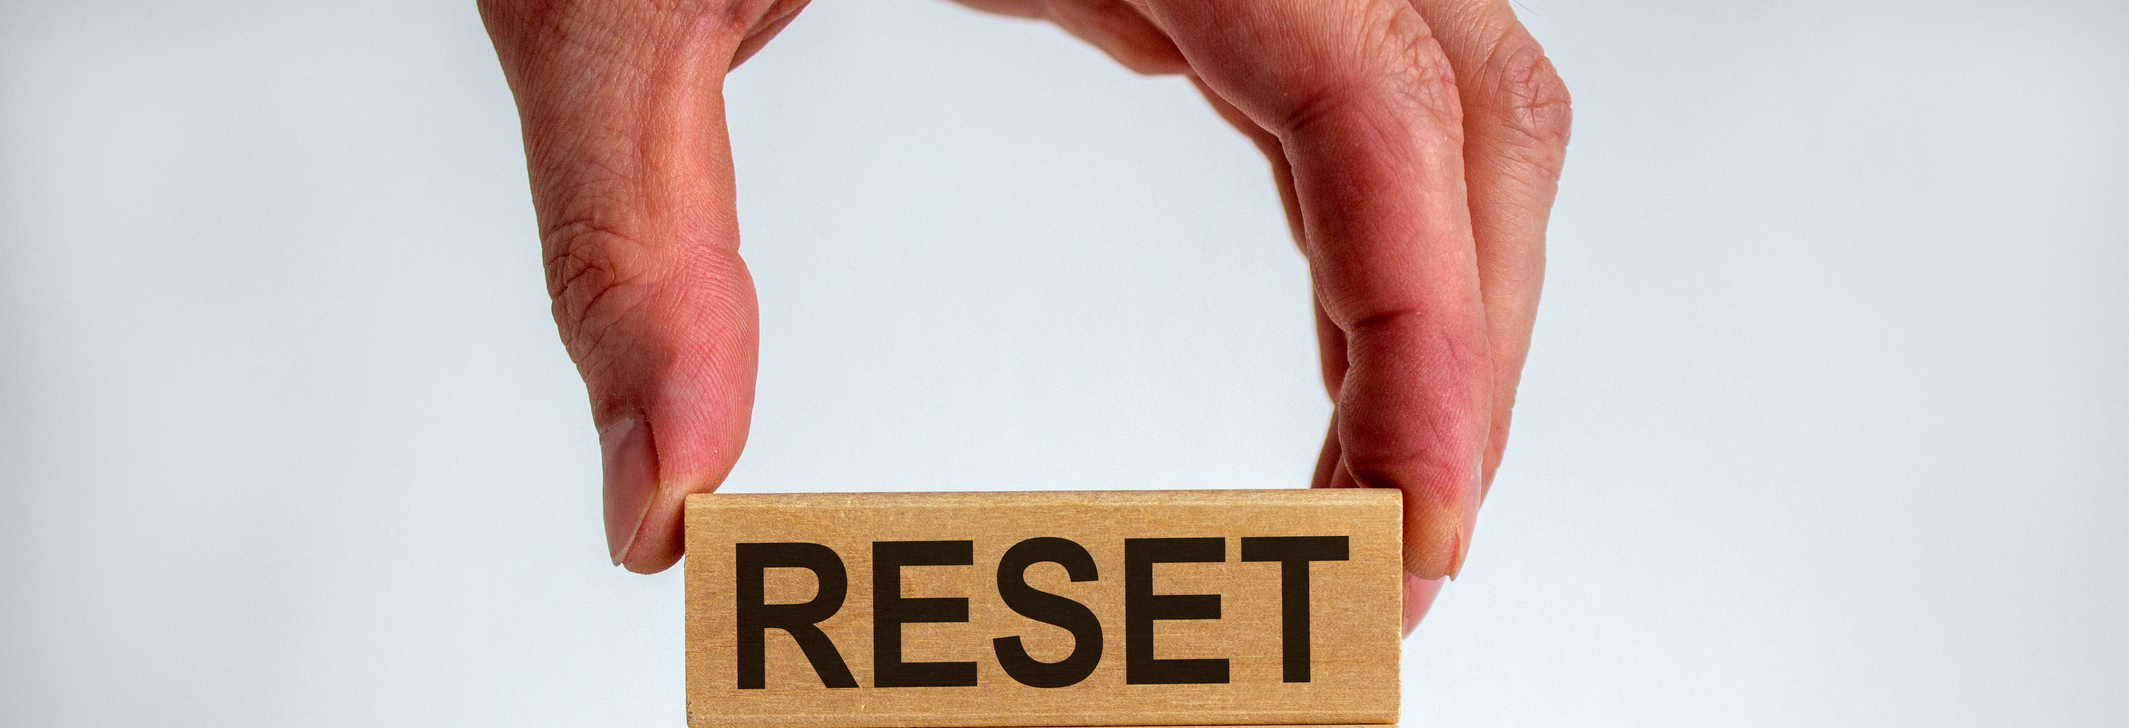 The Great Reset: Modernizing the Partnerships among HR and People Managers in Today's Resilience Economy